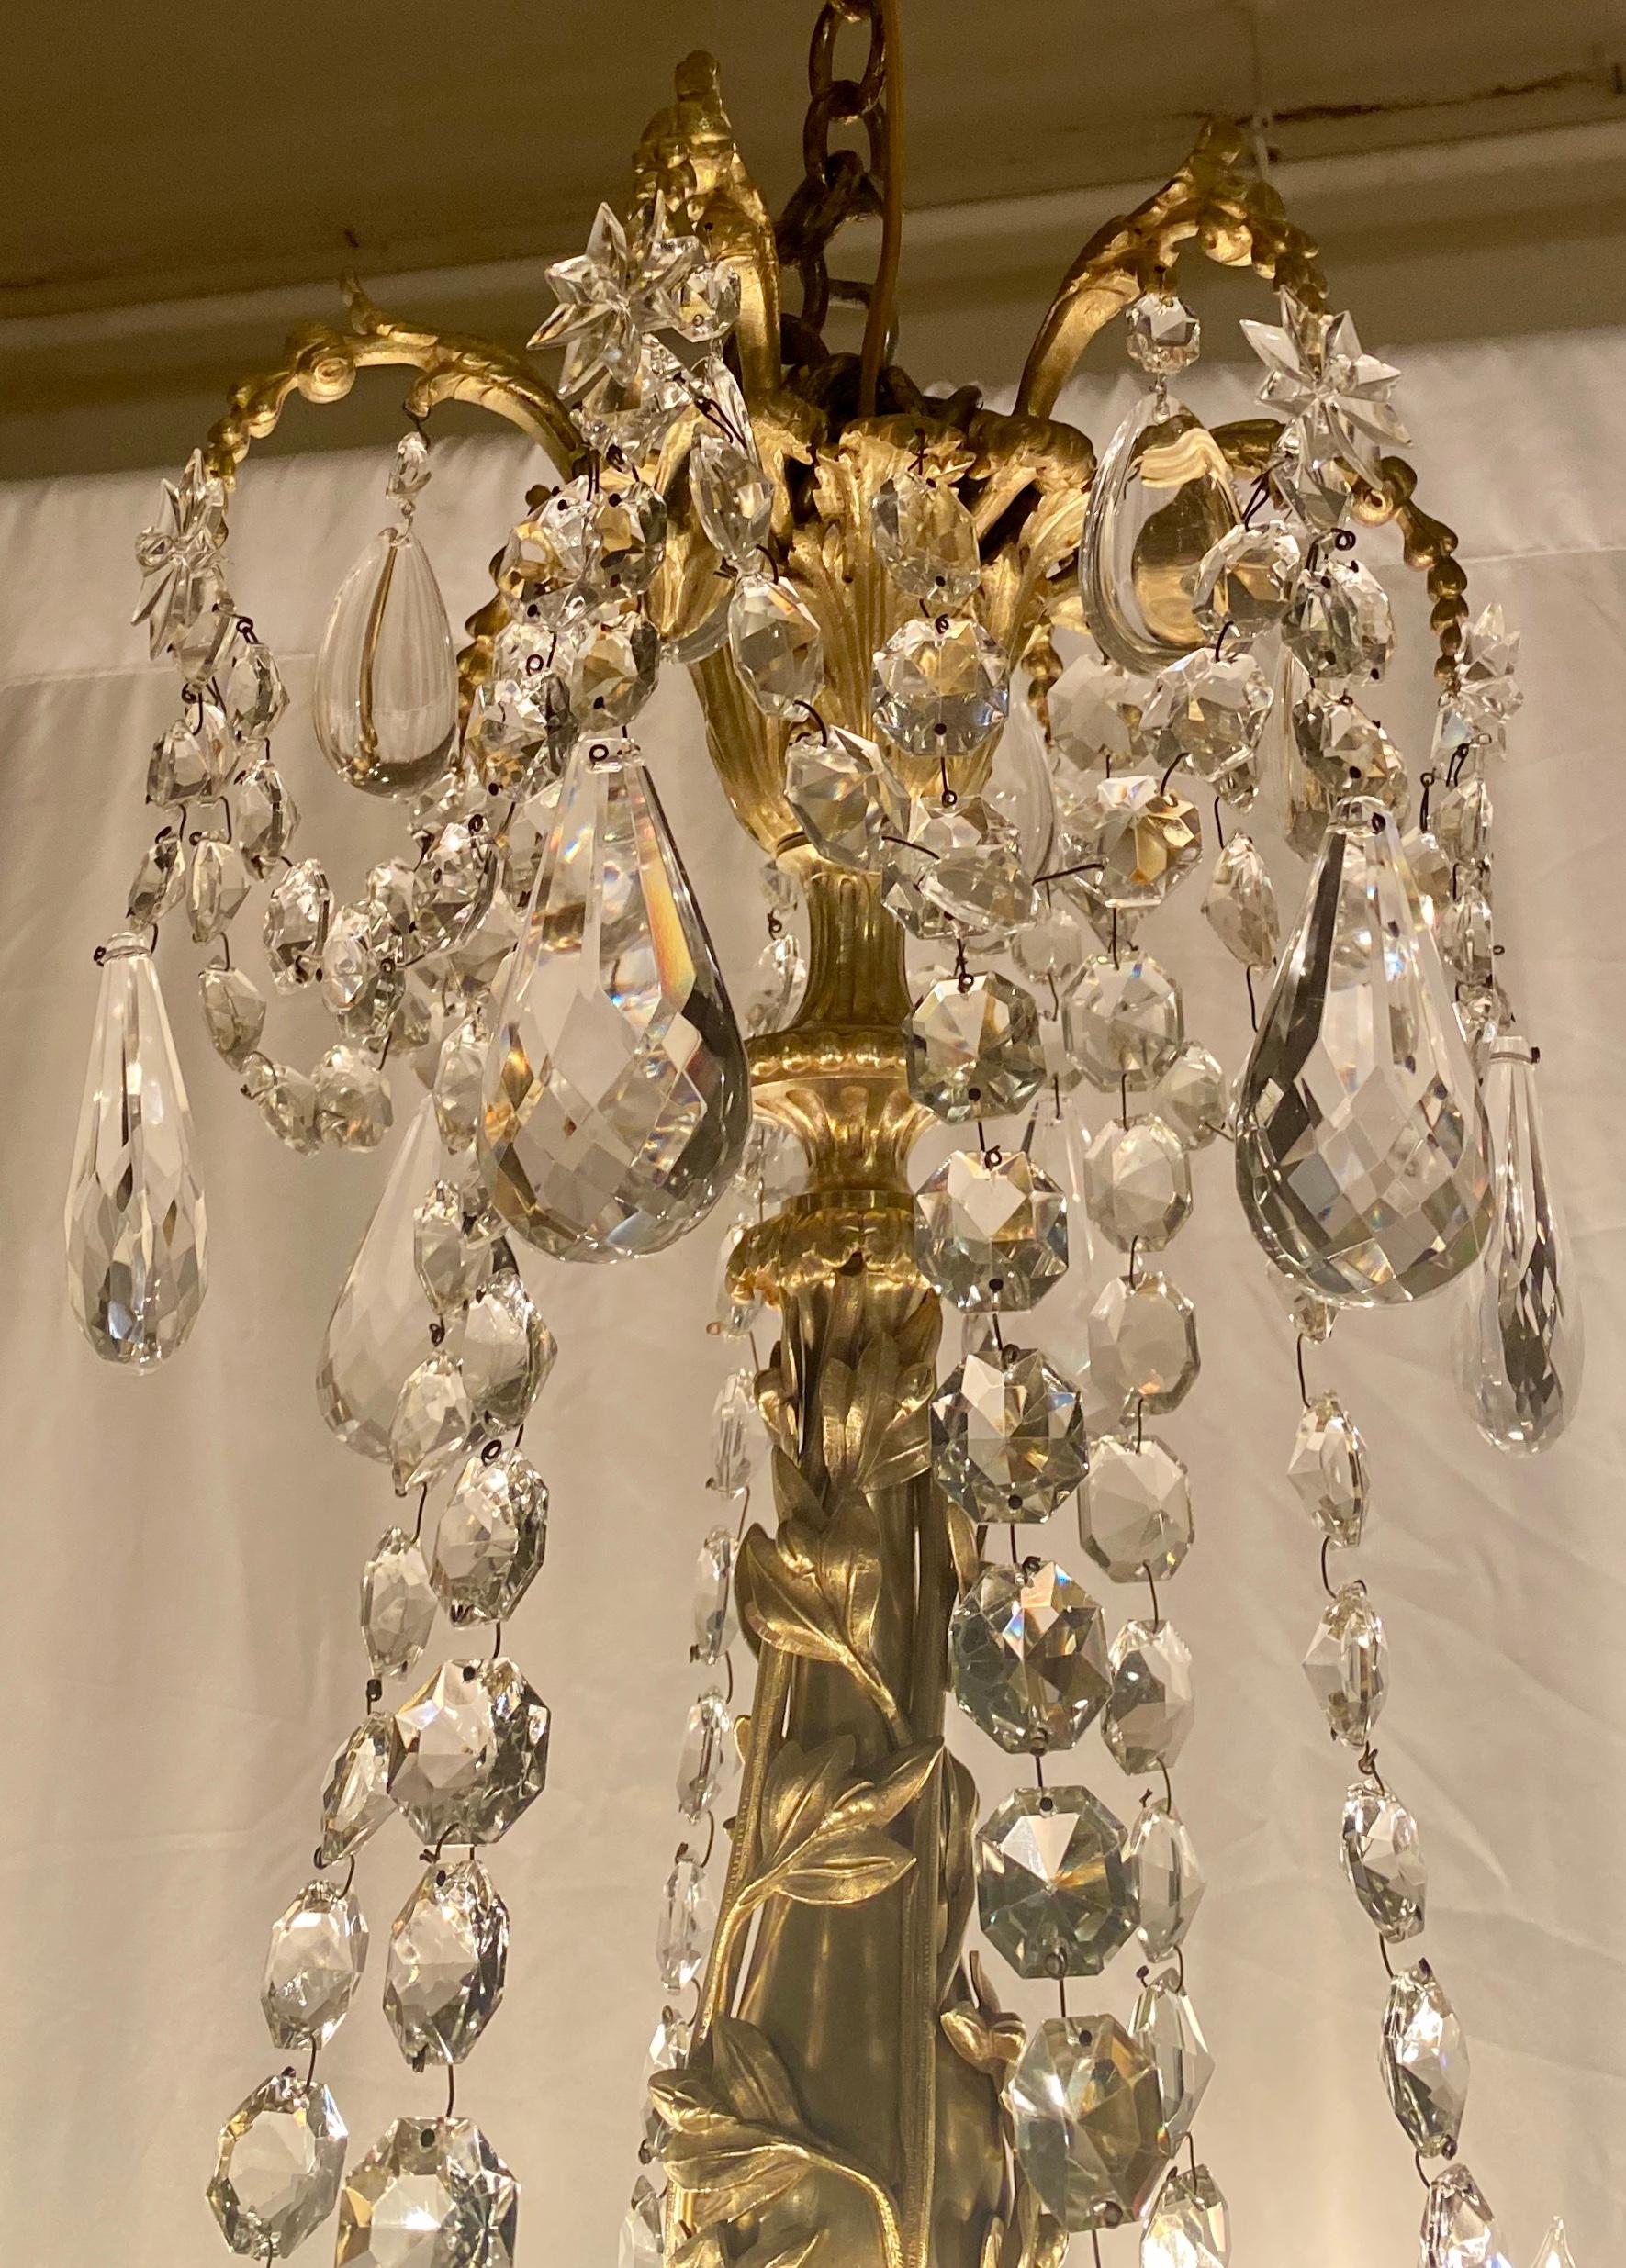 Antique French Napoleon III exceptional ormolu and crystal 24-light chandelier, circa 1880-1890.
CHC225.